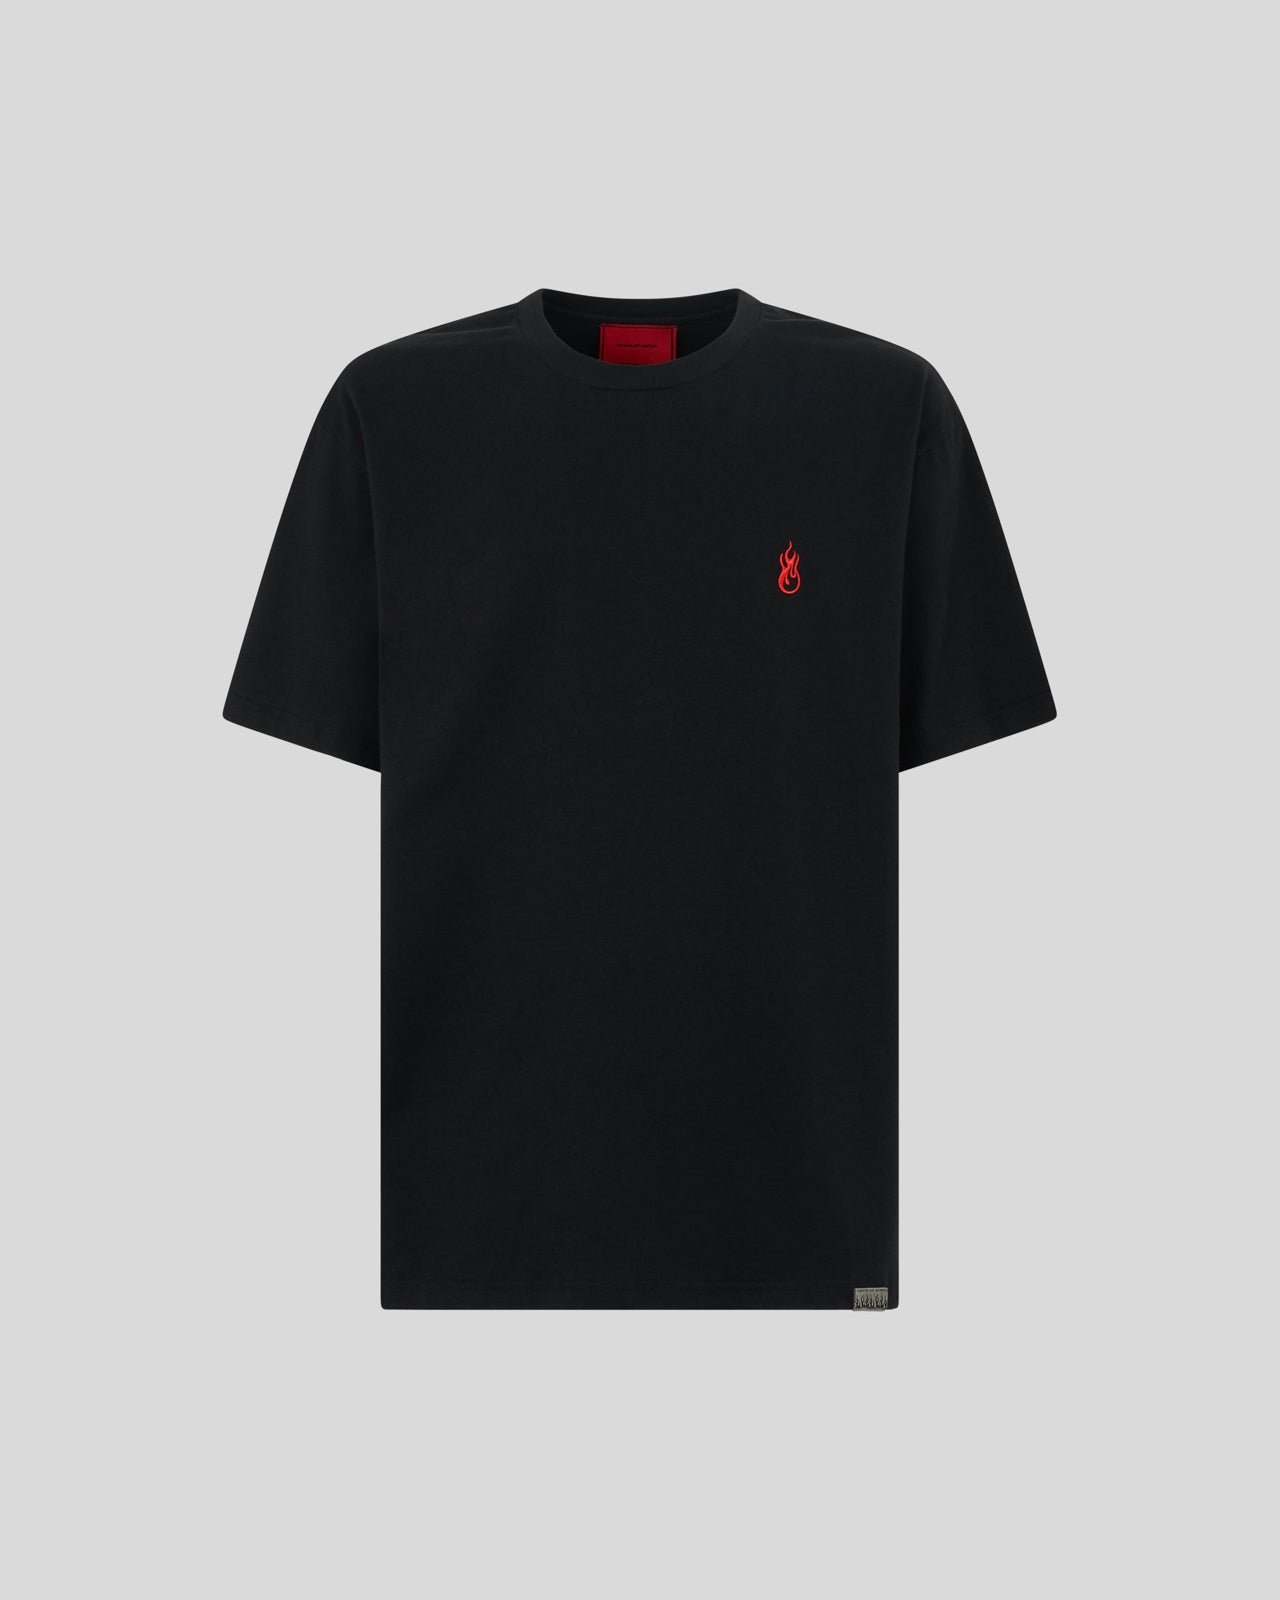 BLACK T-SHIRT WITH FLAMES LOGO